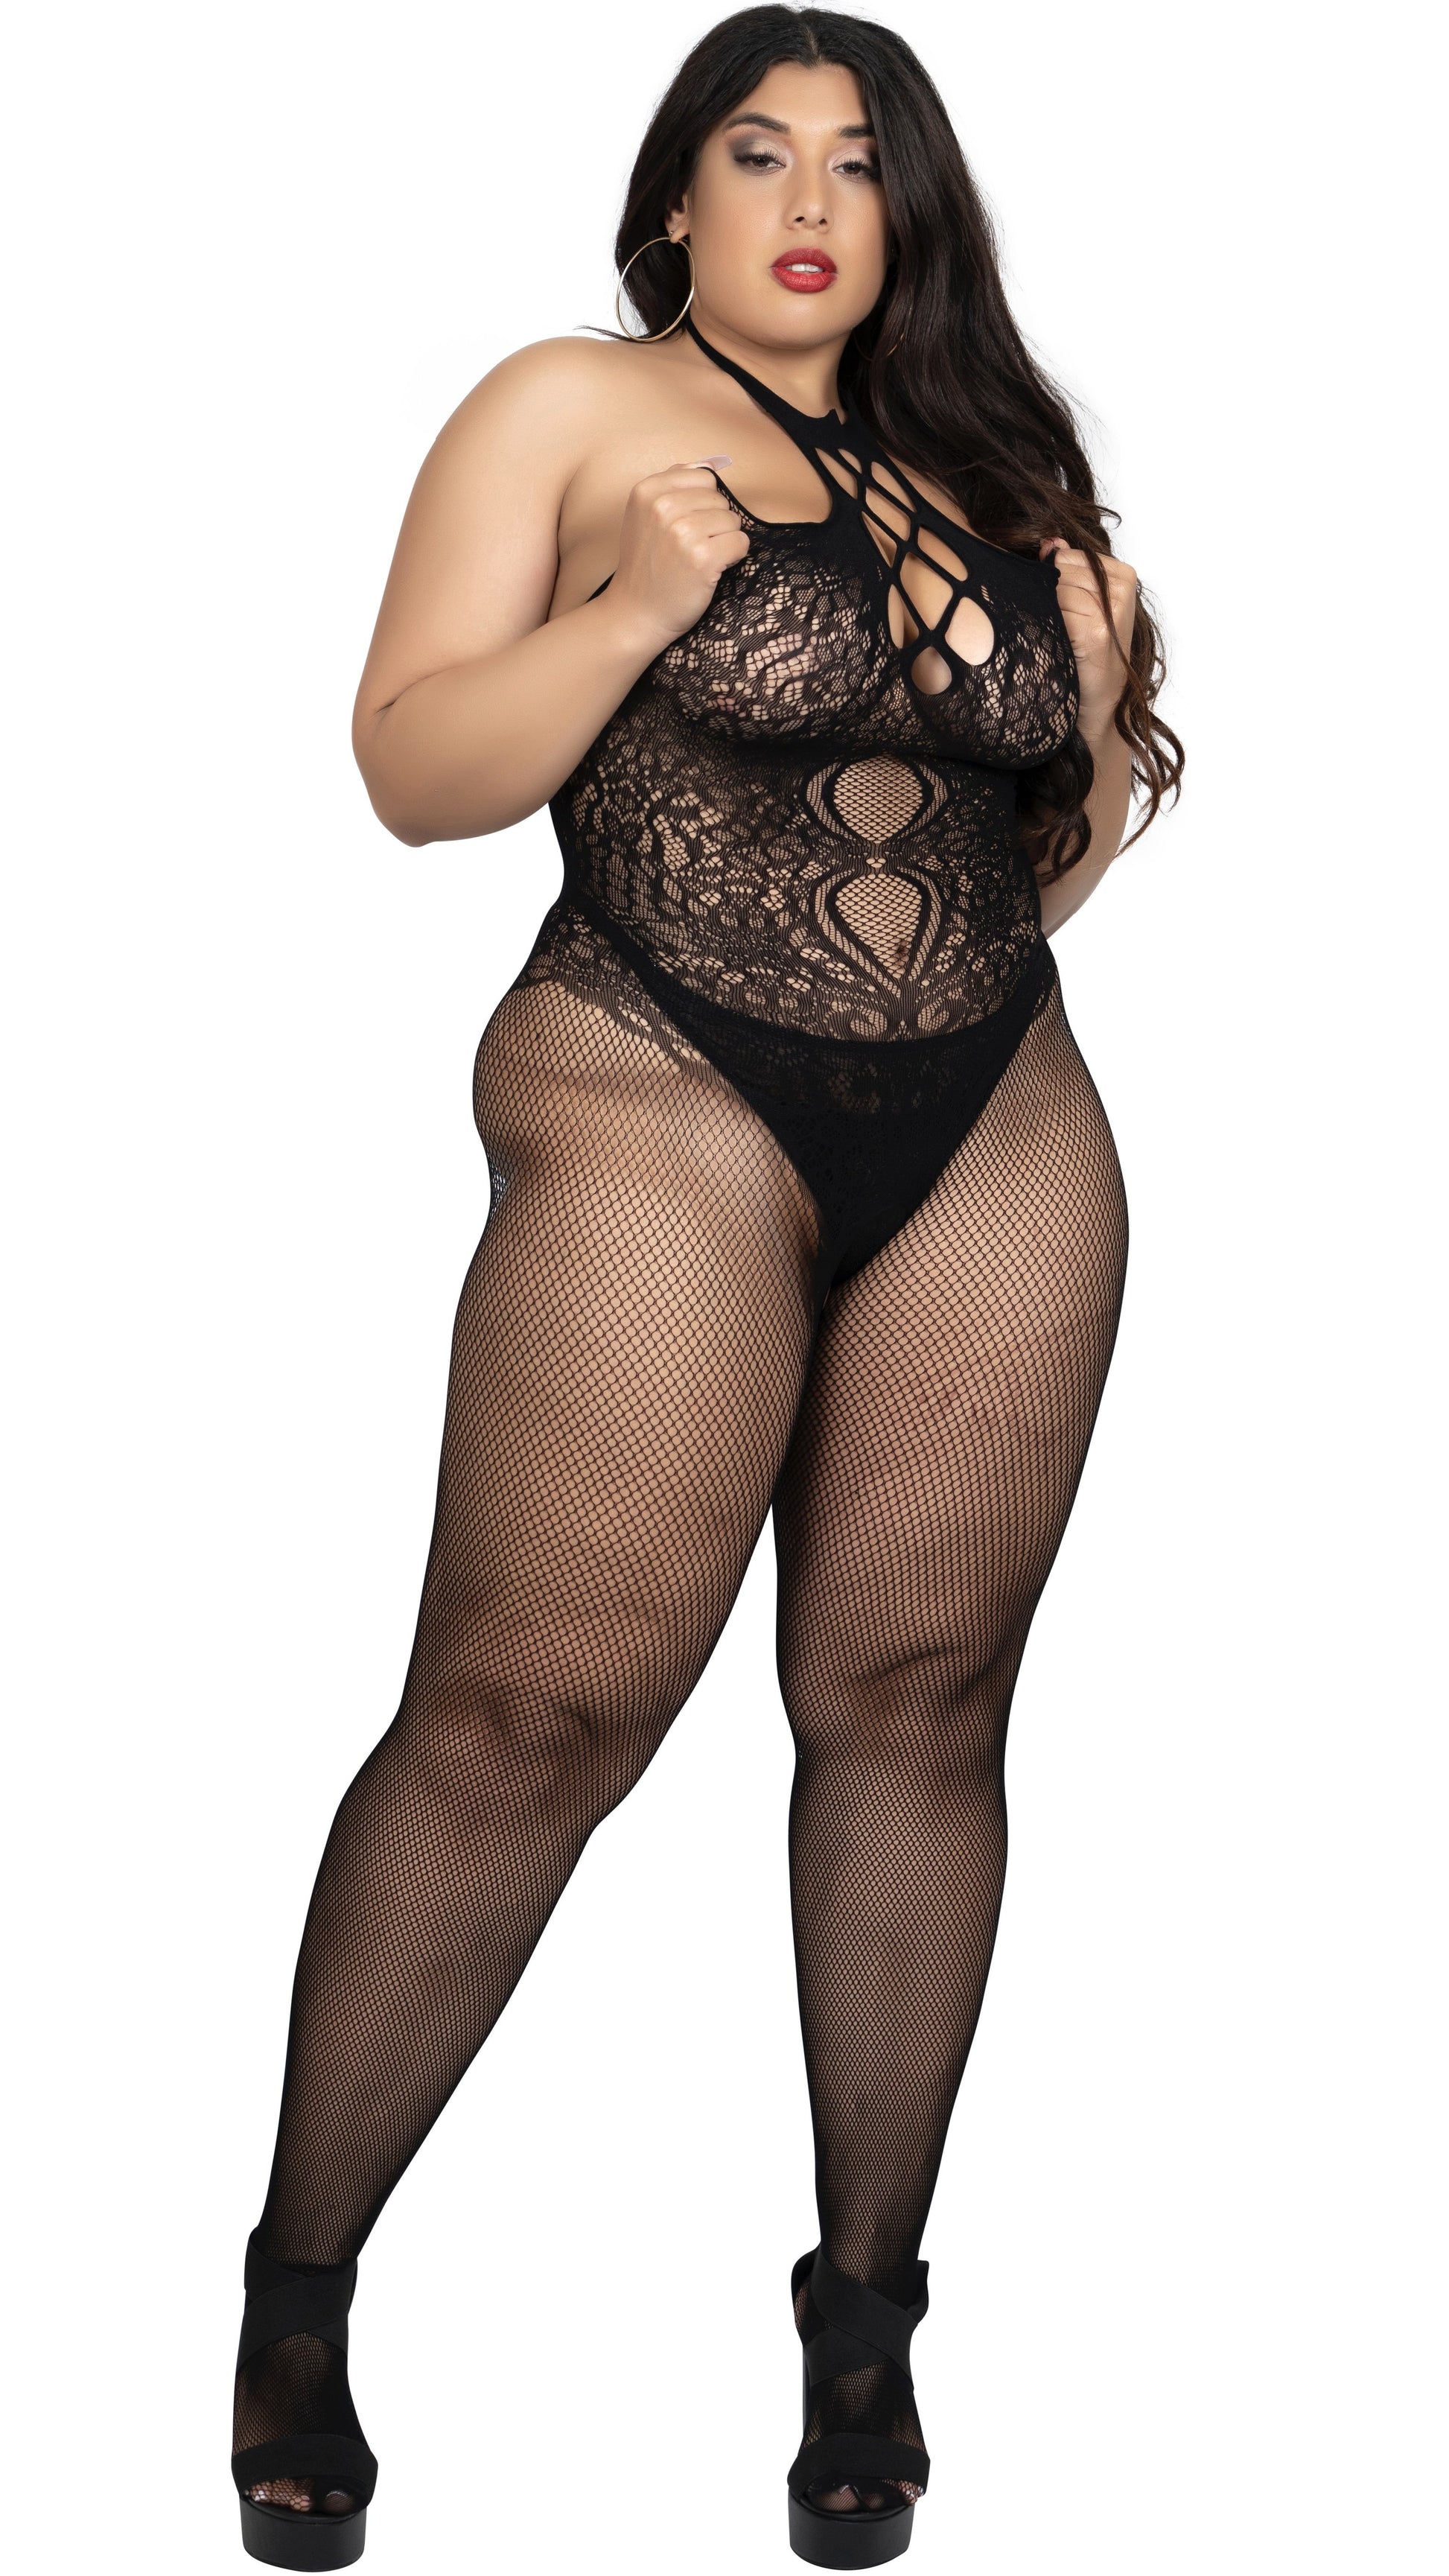 Hug Me Body Stocking (Black)-Lingerie-Boughie-O/S Queen-Boughie